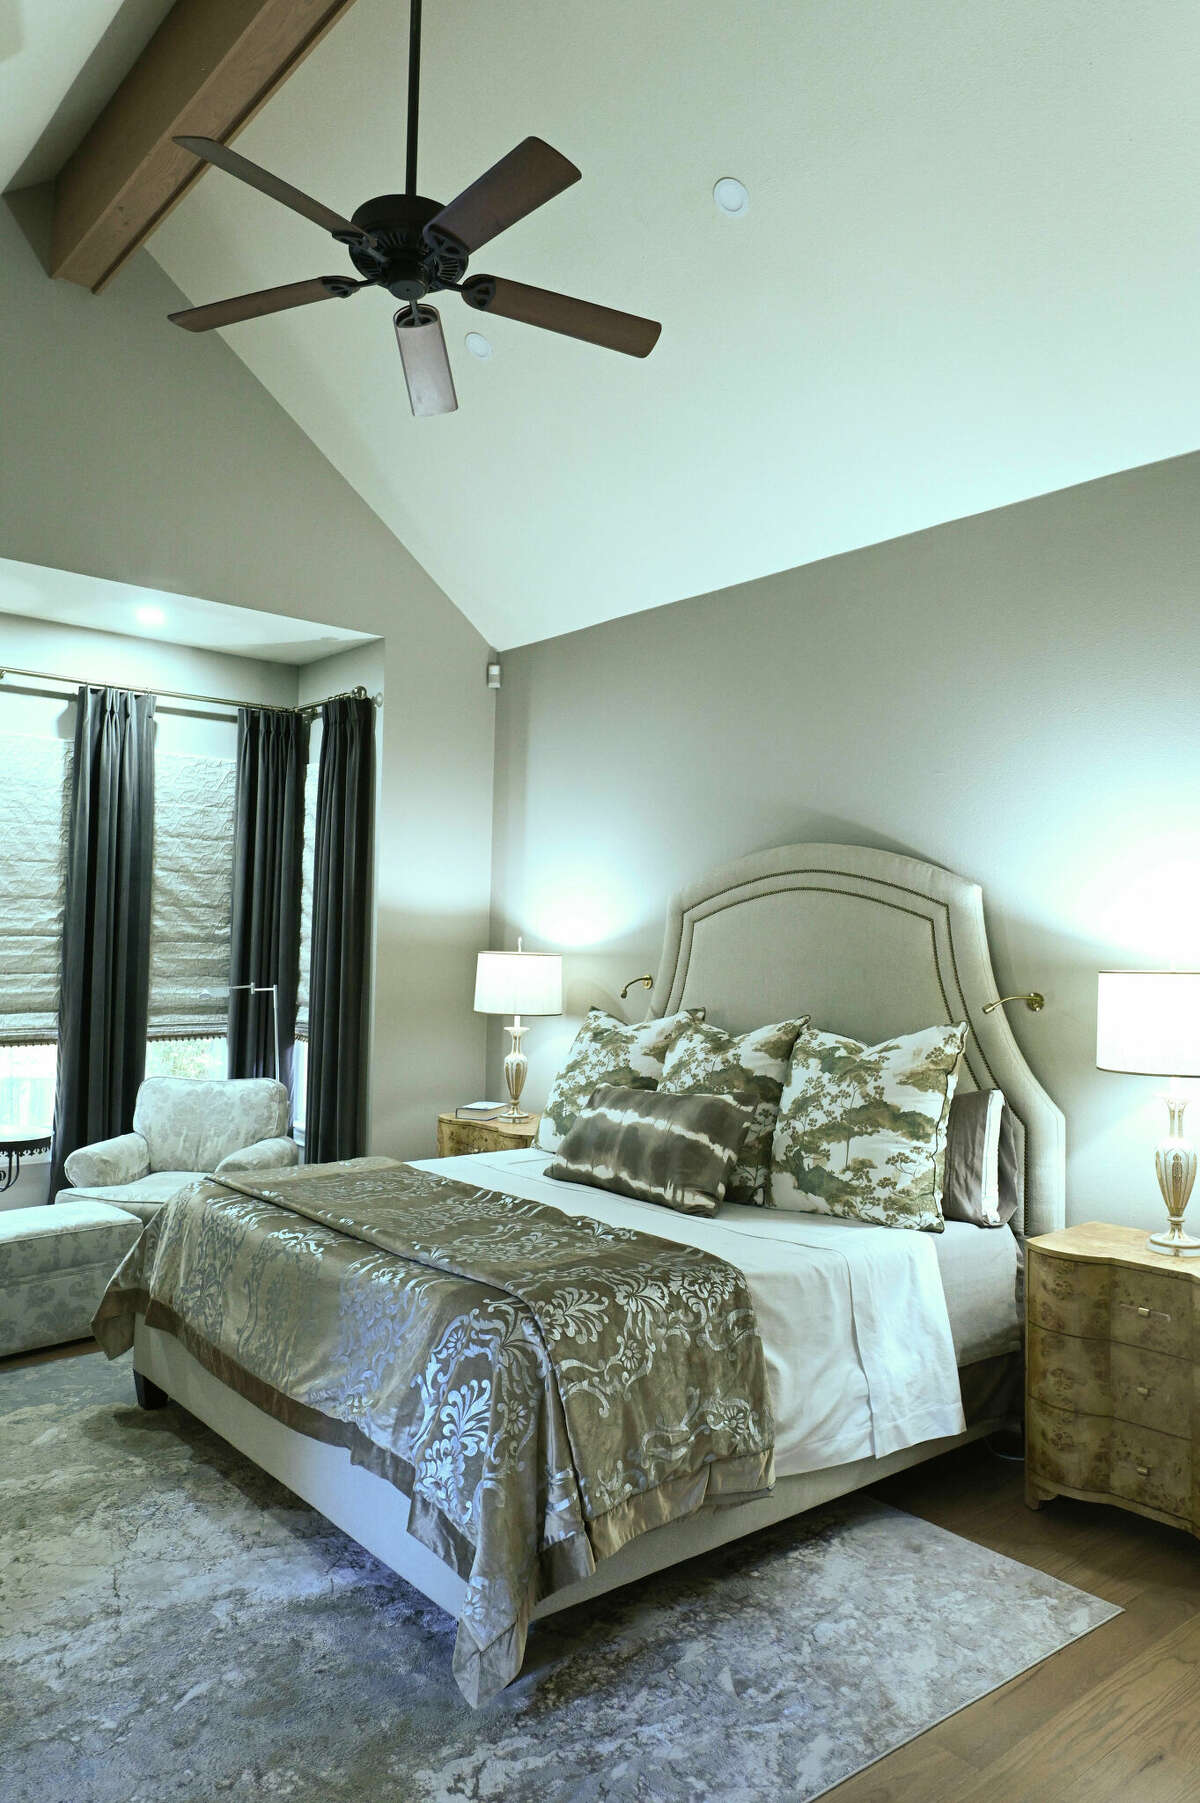 The owners' bedroom was made into a refuge with warm grays from the walls to the all-new fixtures and furnishings, including window treatments and headboard.